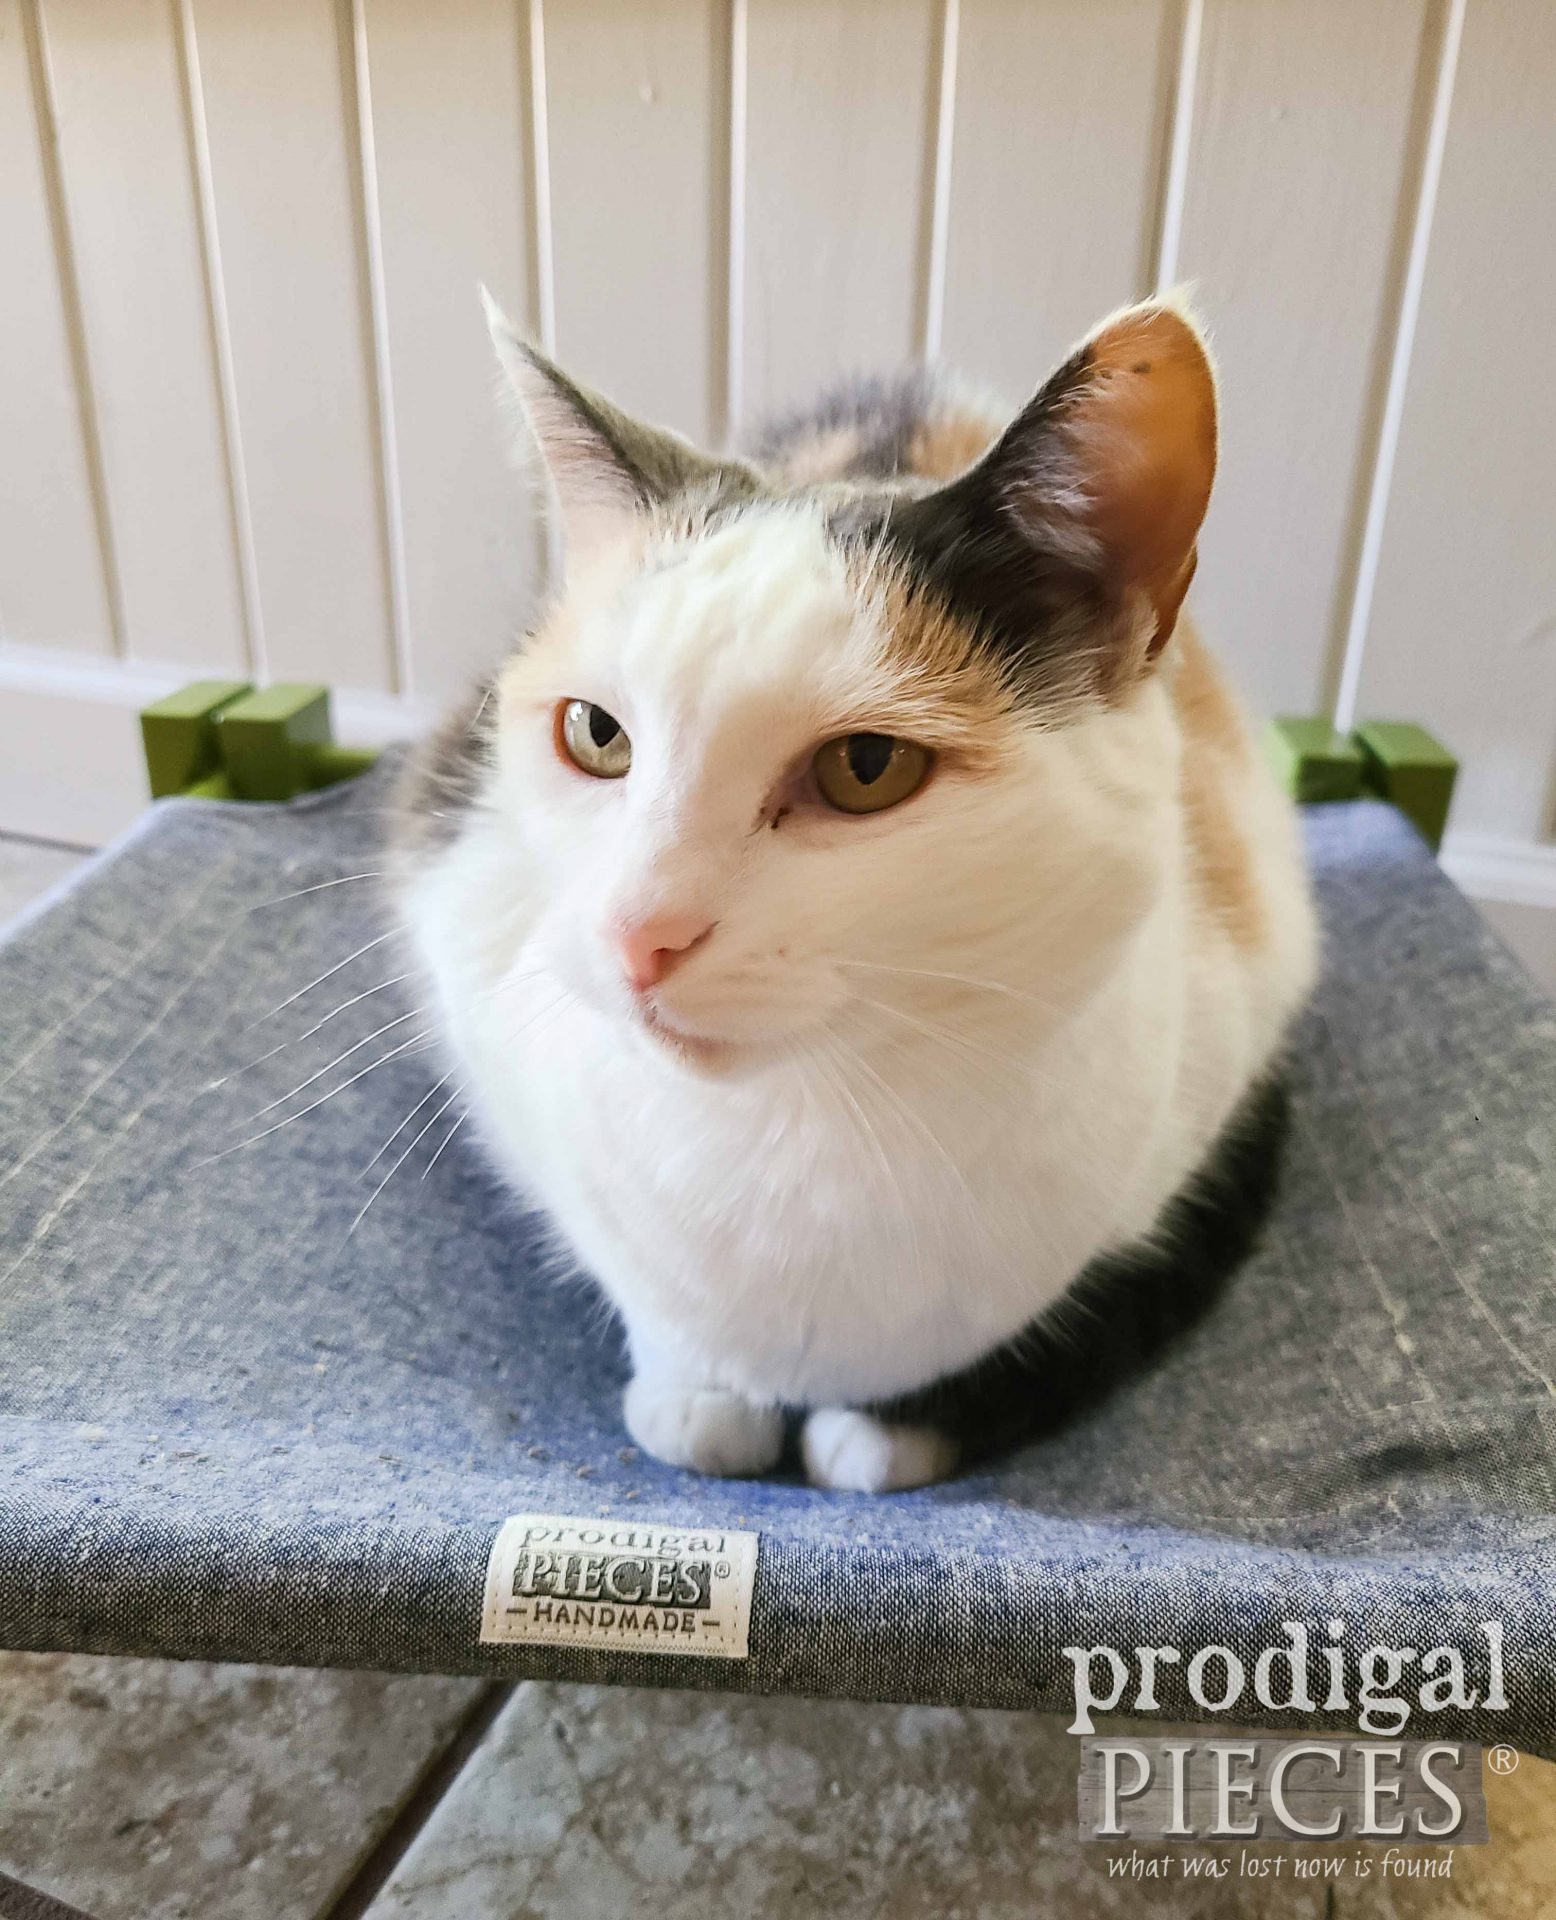 Adorable White Calico Cat on Cot by Larissa of Prodigal Pieces | prodigalpieces.com #prodigalpieces #pets #furbaby #cat #dog